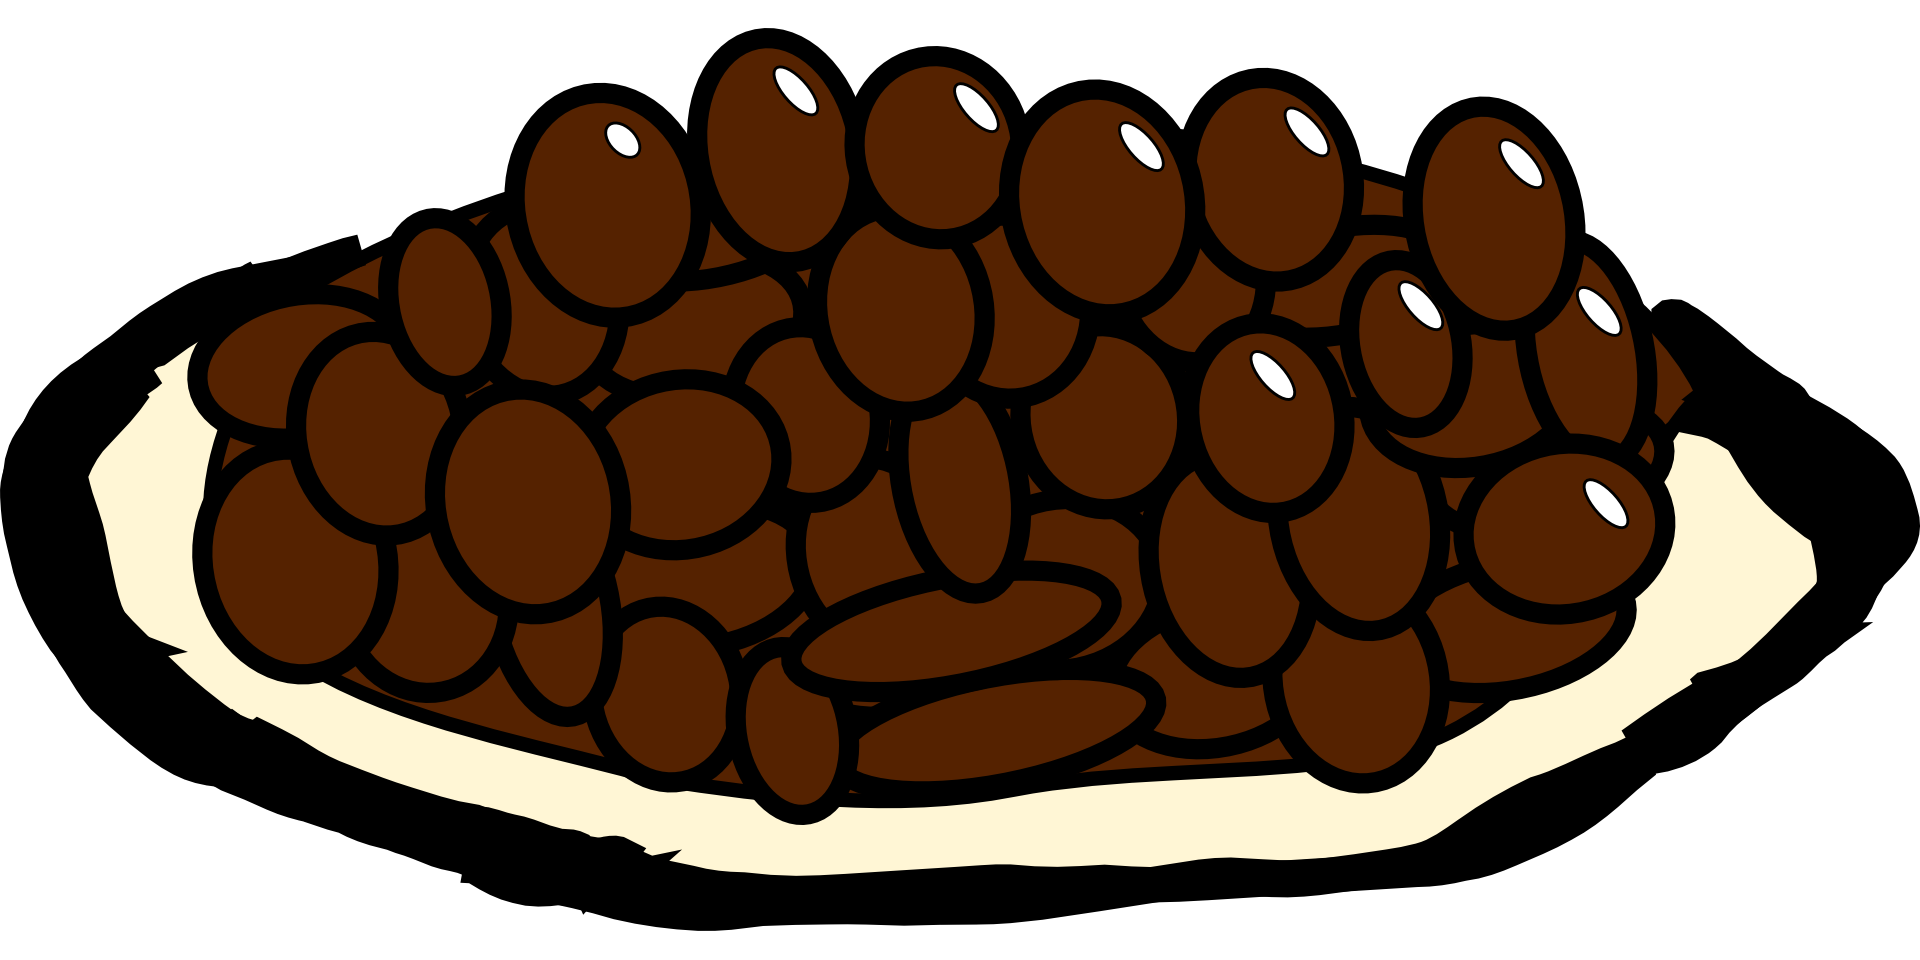 Beans clipart refried bean. Rice and baked clip